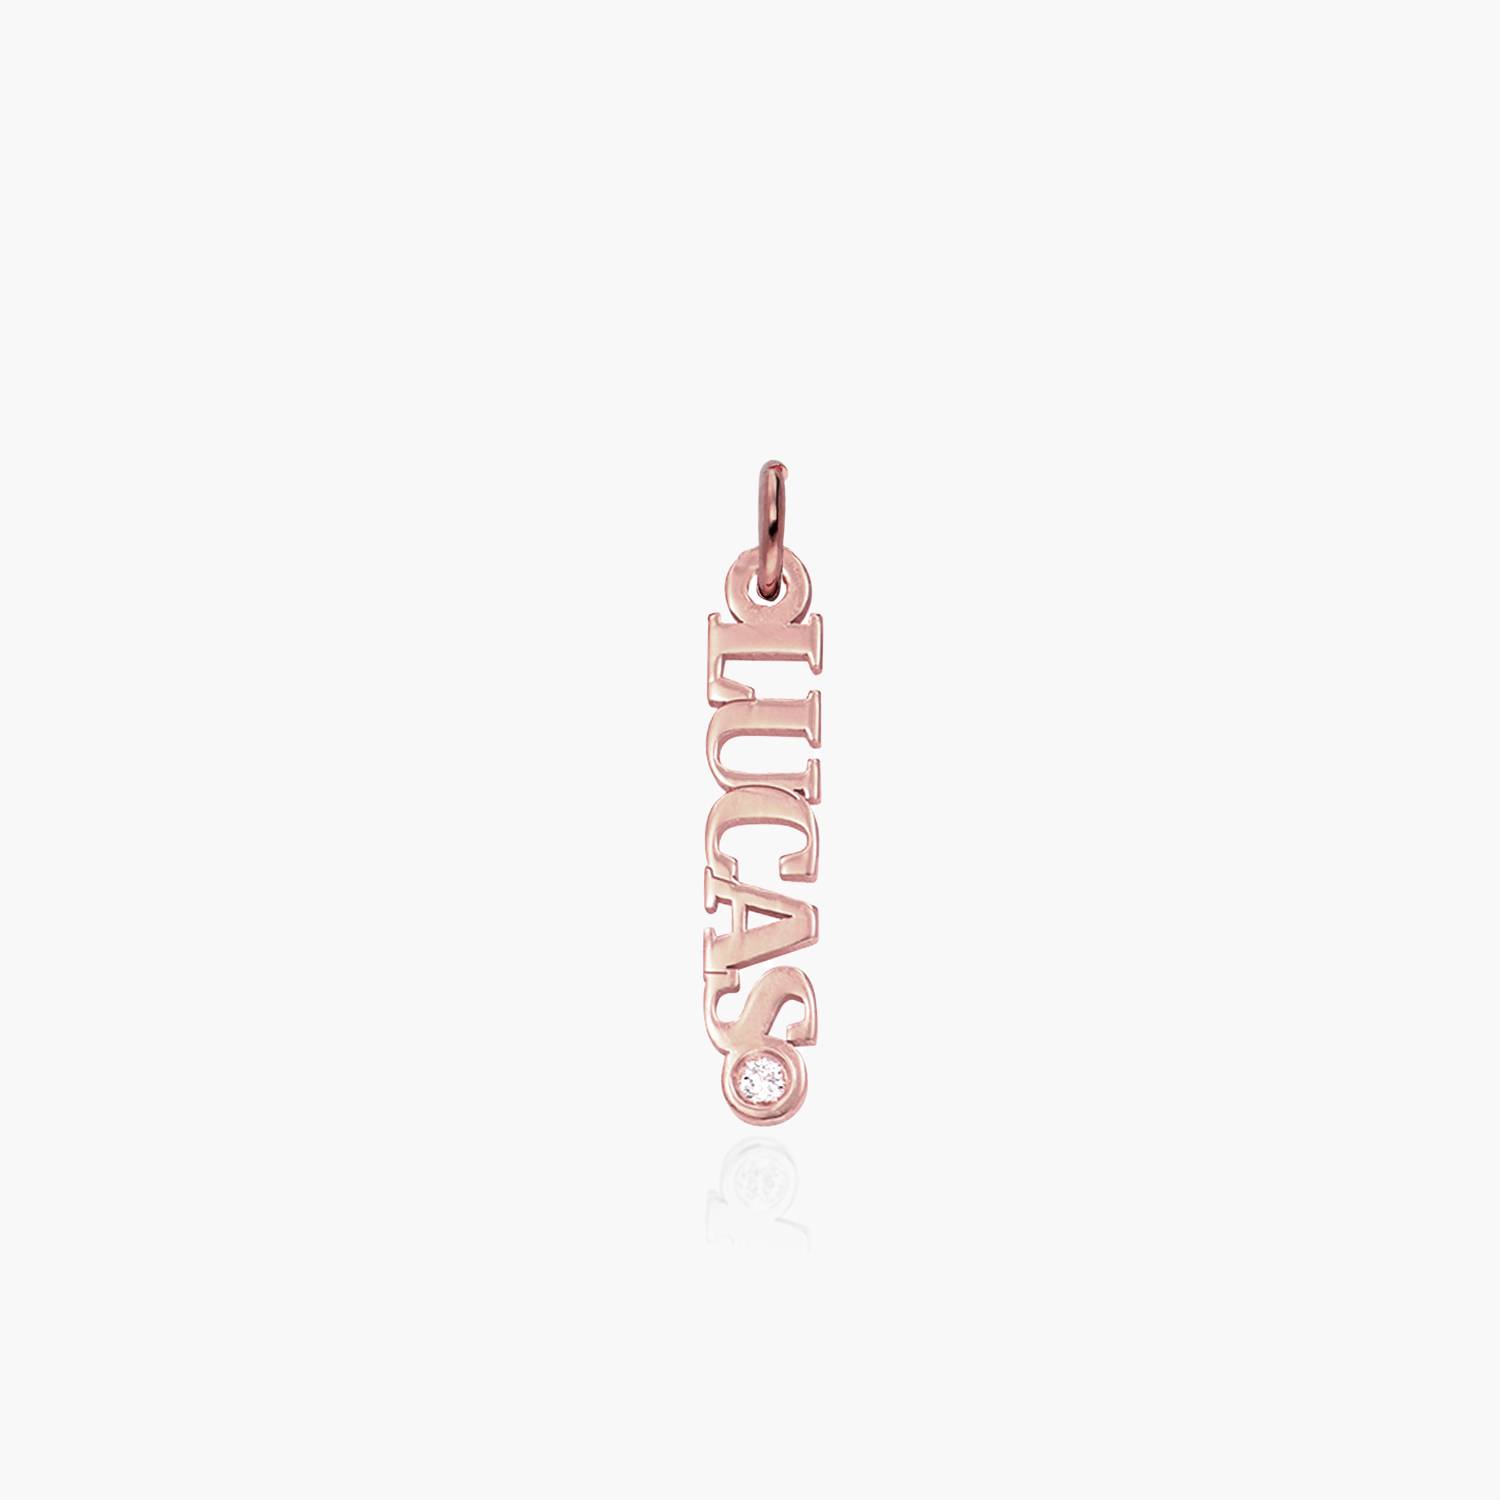 EXTRA Personalized Name Charm with Diamond - Rose Gold Vermeil